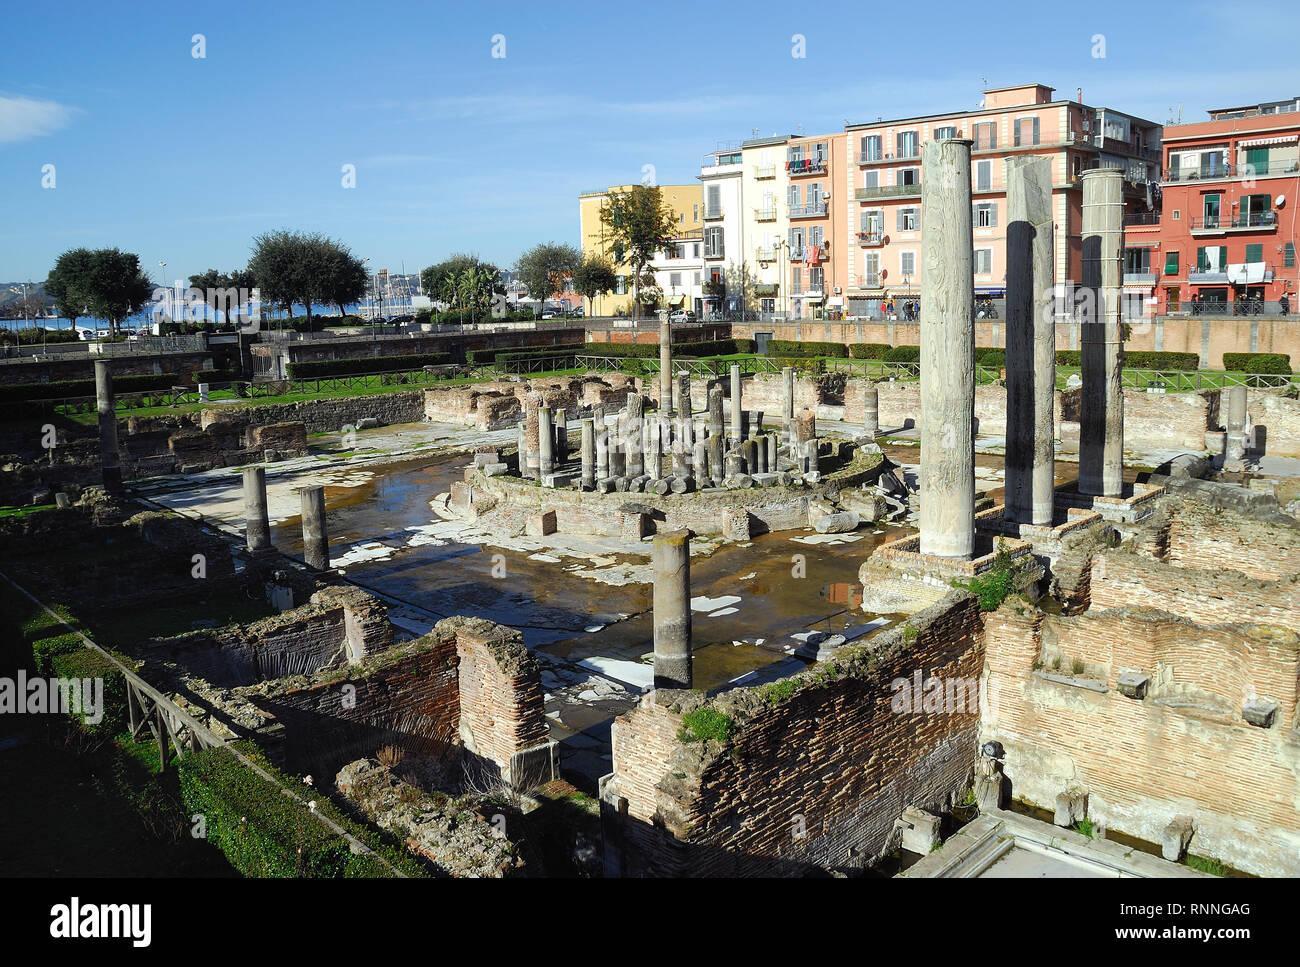 Pozzuoli, Campania, Italy. The Macellum : it  was the macellum or market building of the Roman colony of Puteoli, now the city of Pozzuoli in southern Italy. When first excavated in the 18th century, the discovery of a statue of Serapis led to the building being misidentified as the city's serapeum or Temple of Serapis. The Macellum is periodically submerged in part by the sea due to the bradyseism of volcanic origin that affects the Phlegraean Fields. The level reached by the water is visible on the columns. The holes left by the Lithophaga molluscs are also visible on the columns. Stock Photo